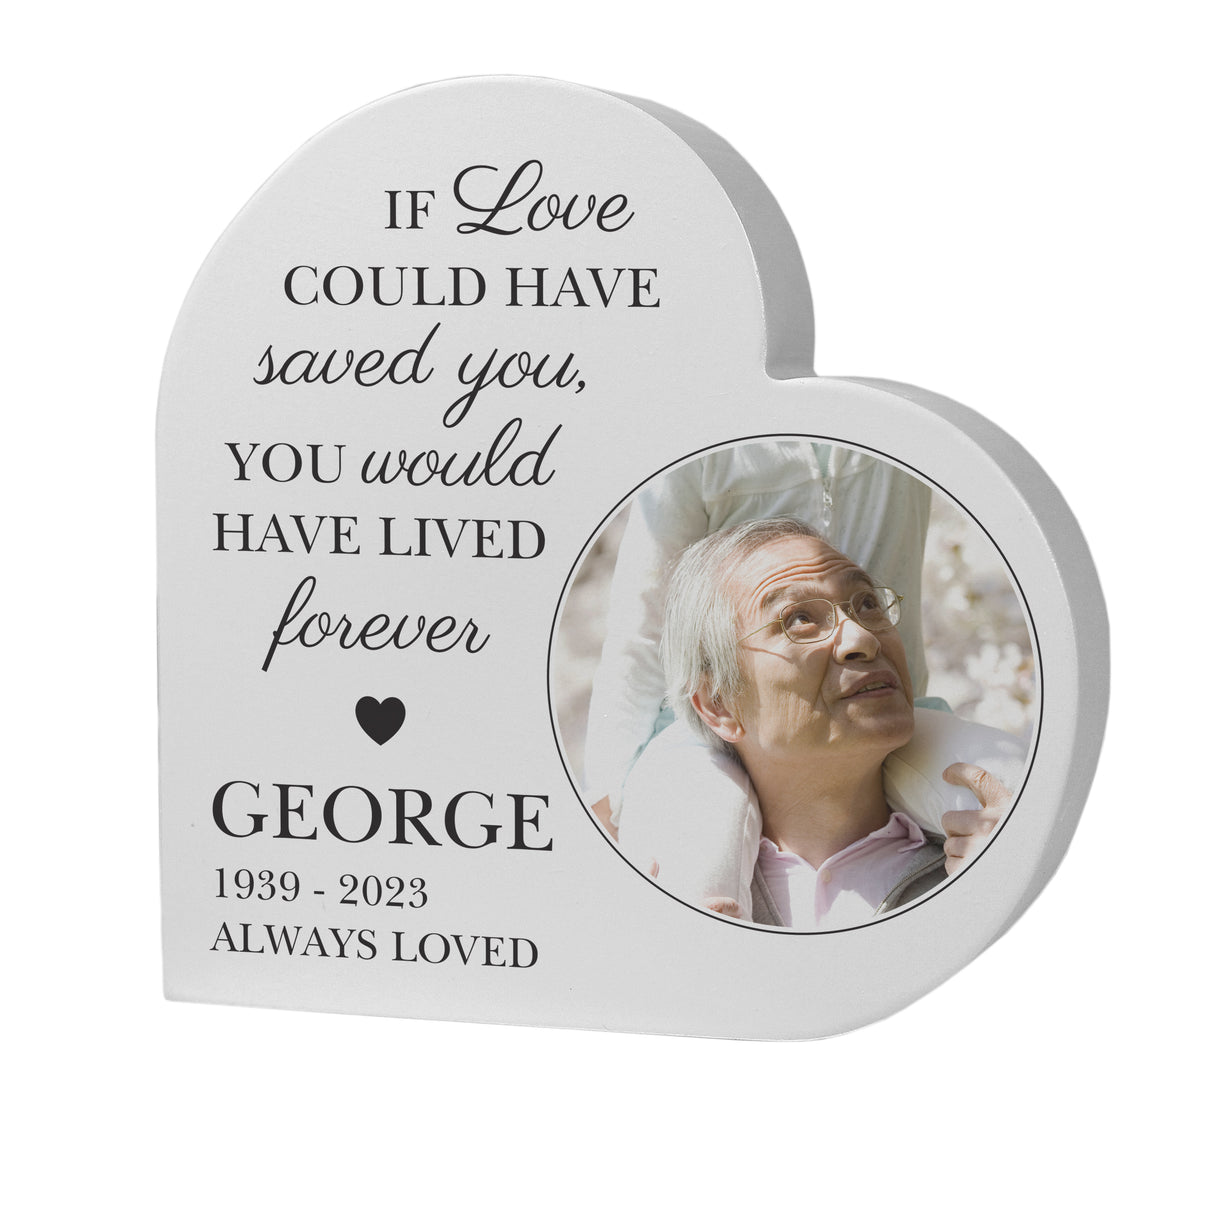 Personalised Memorial Photo Upload Free Standing Heart Ornament